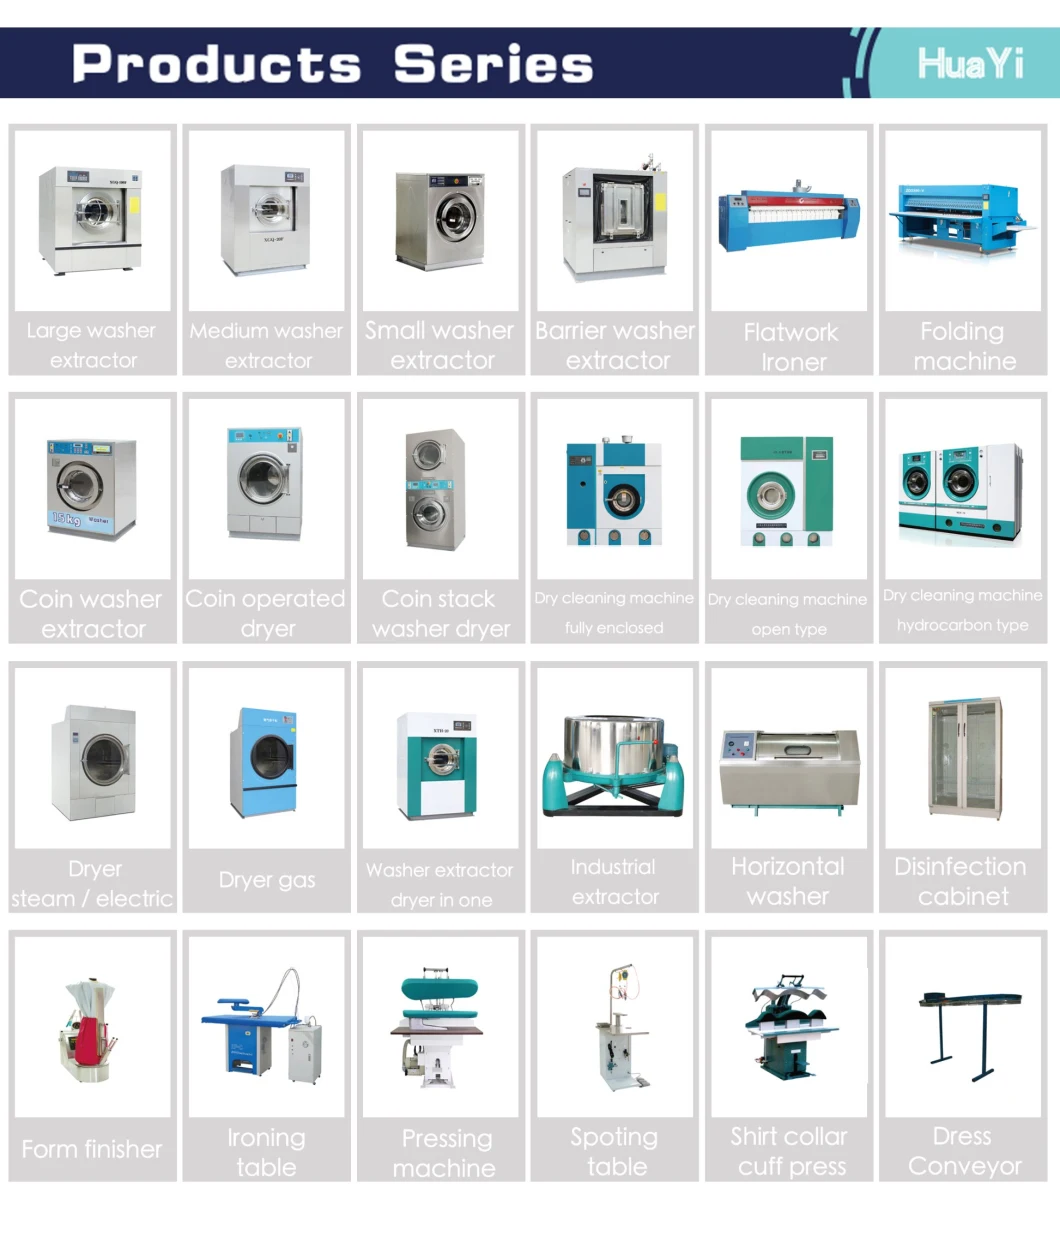 Industerial Laundry Dryer / Tumble Dryer/Dryer Machine 15-100kg Factory Outlet